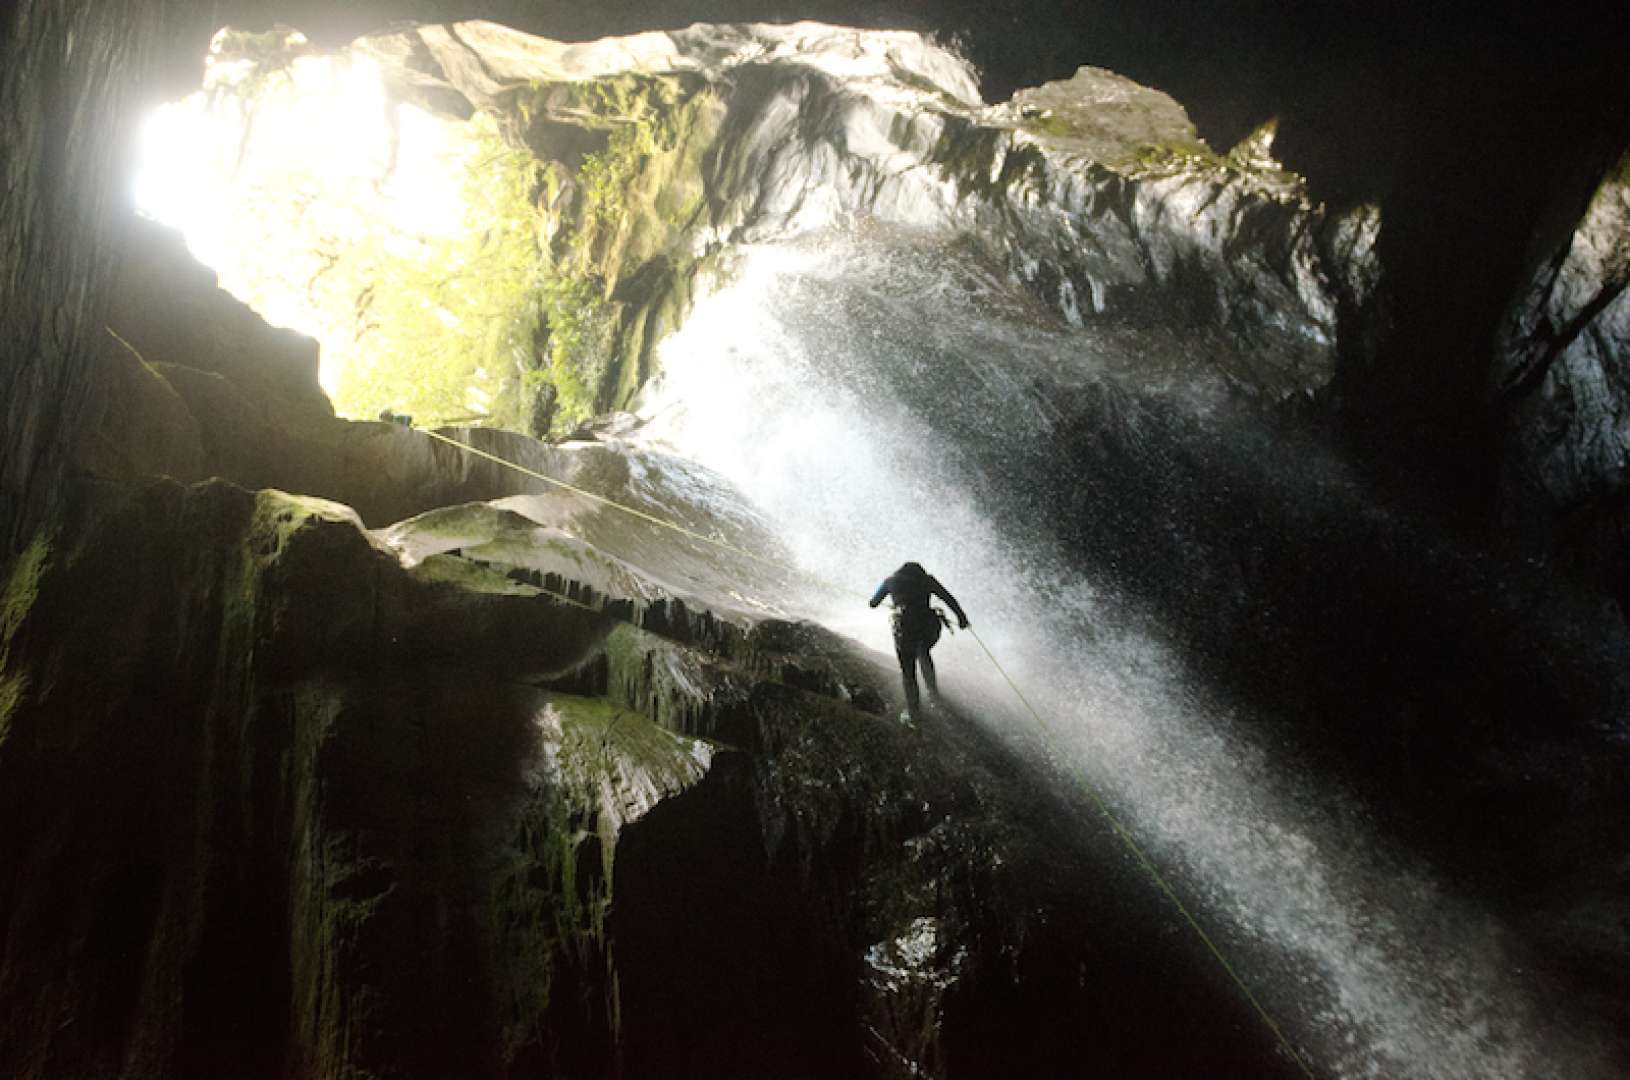 Canyoning in New Zealand